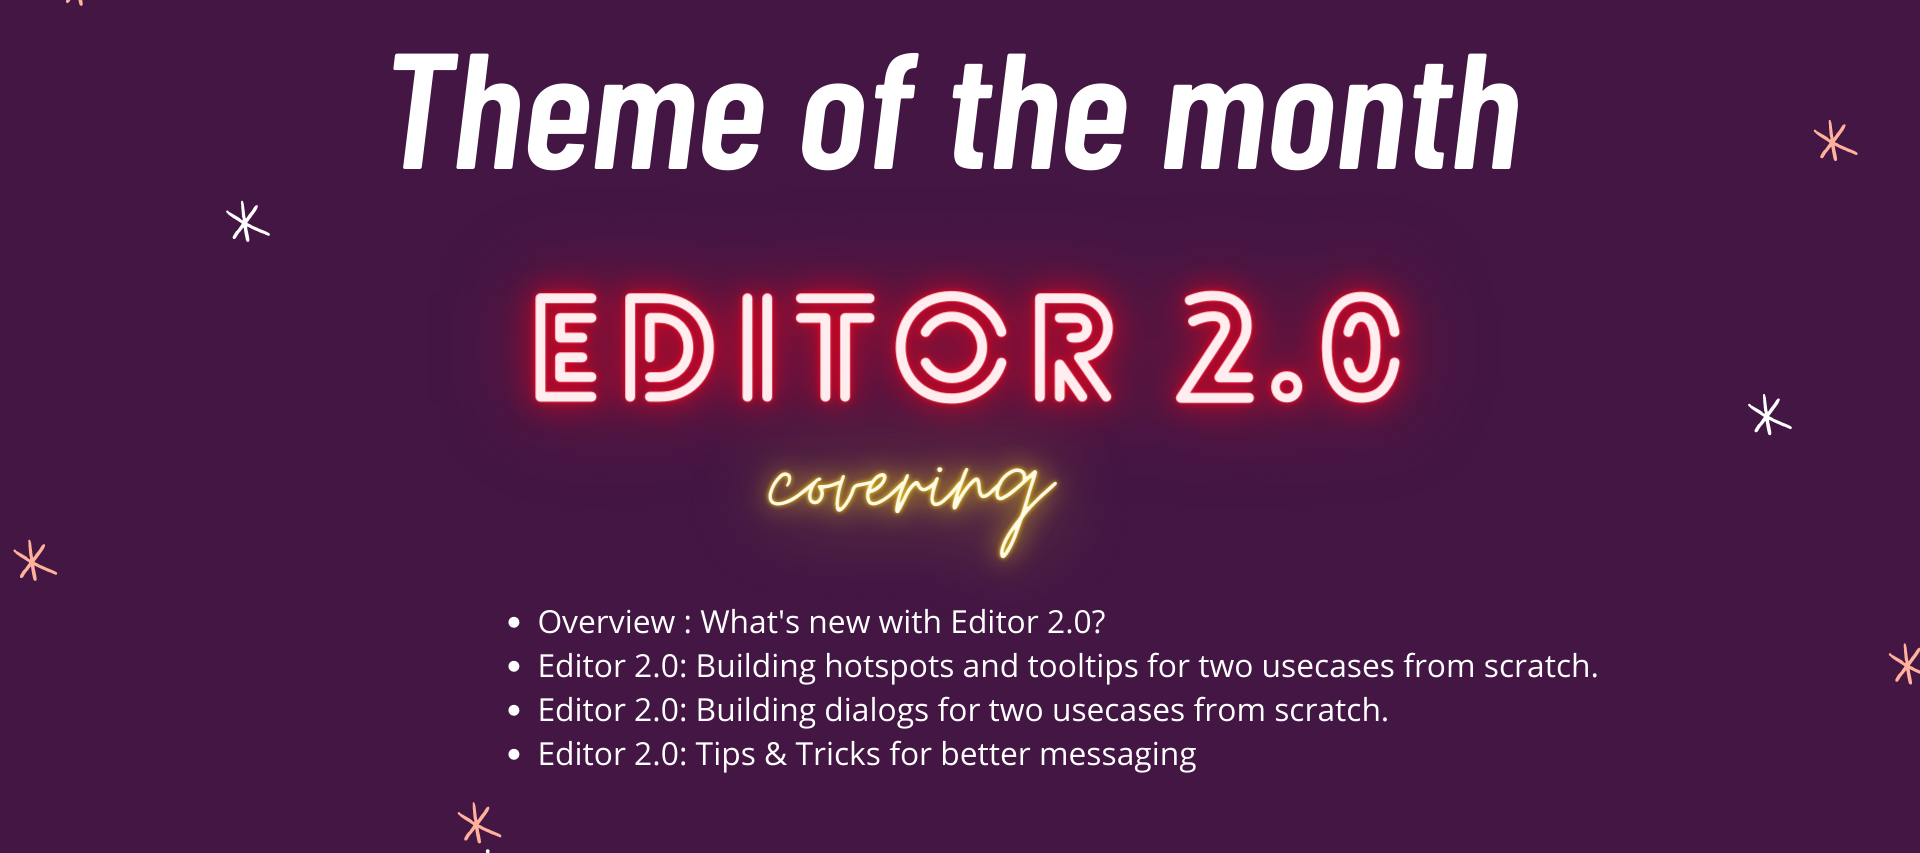 PX - Theme of the month : Editor 2.0 Enablement